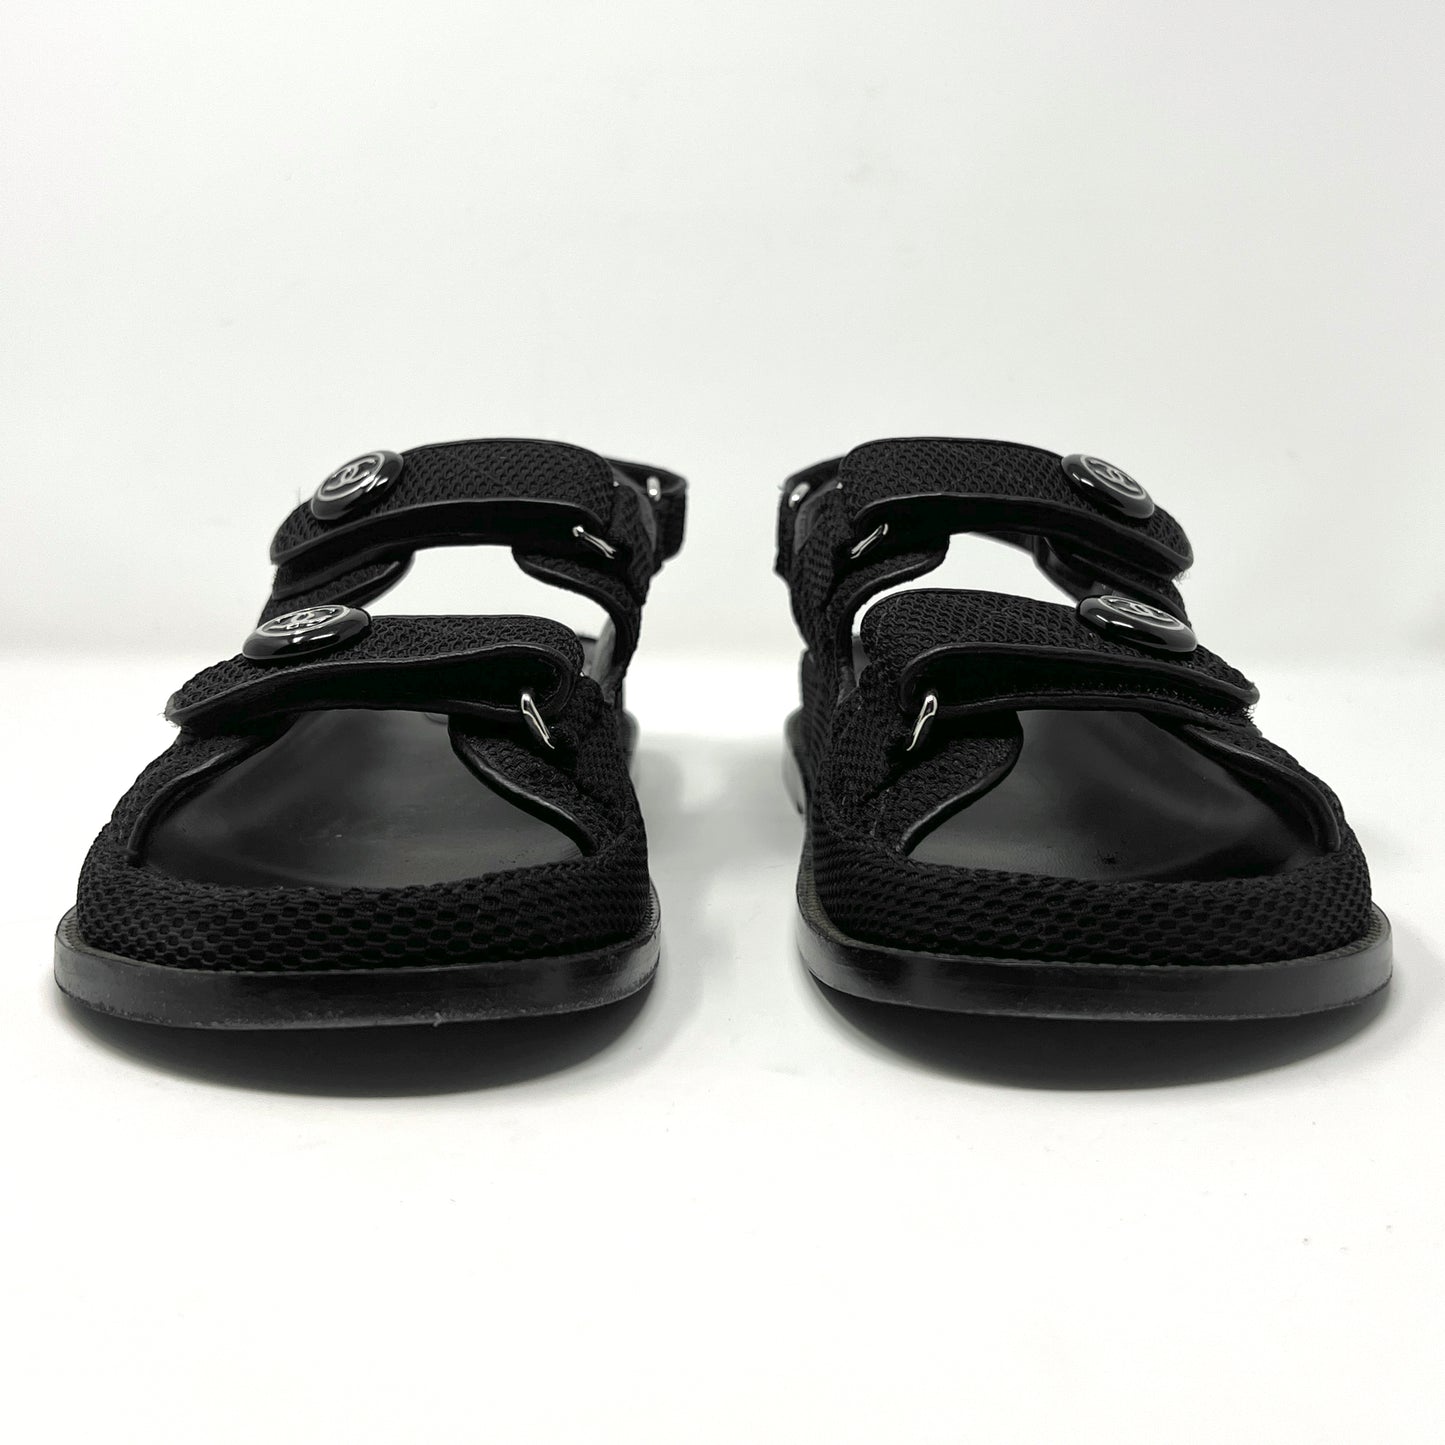 Chanel Interlocking Logo Black Quilted Fabric Double Strap Dad Flat Sandals Size EU 38.5